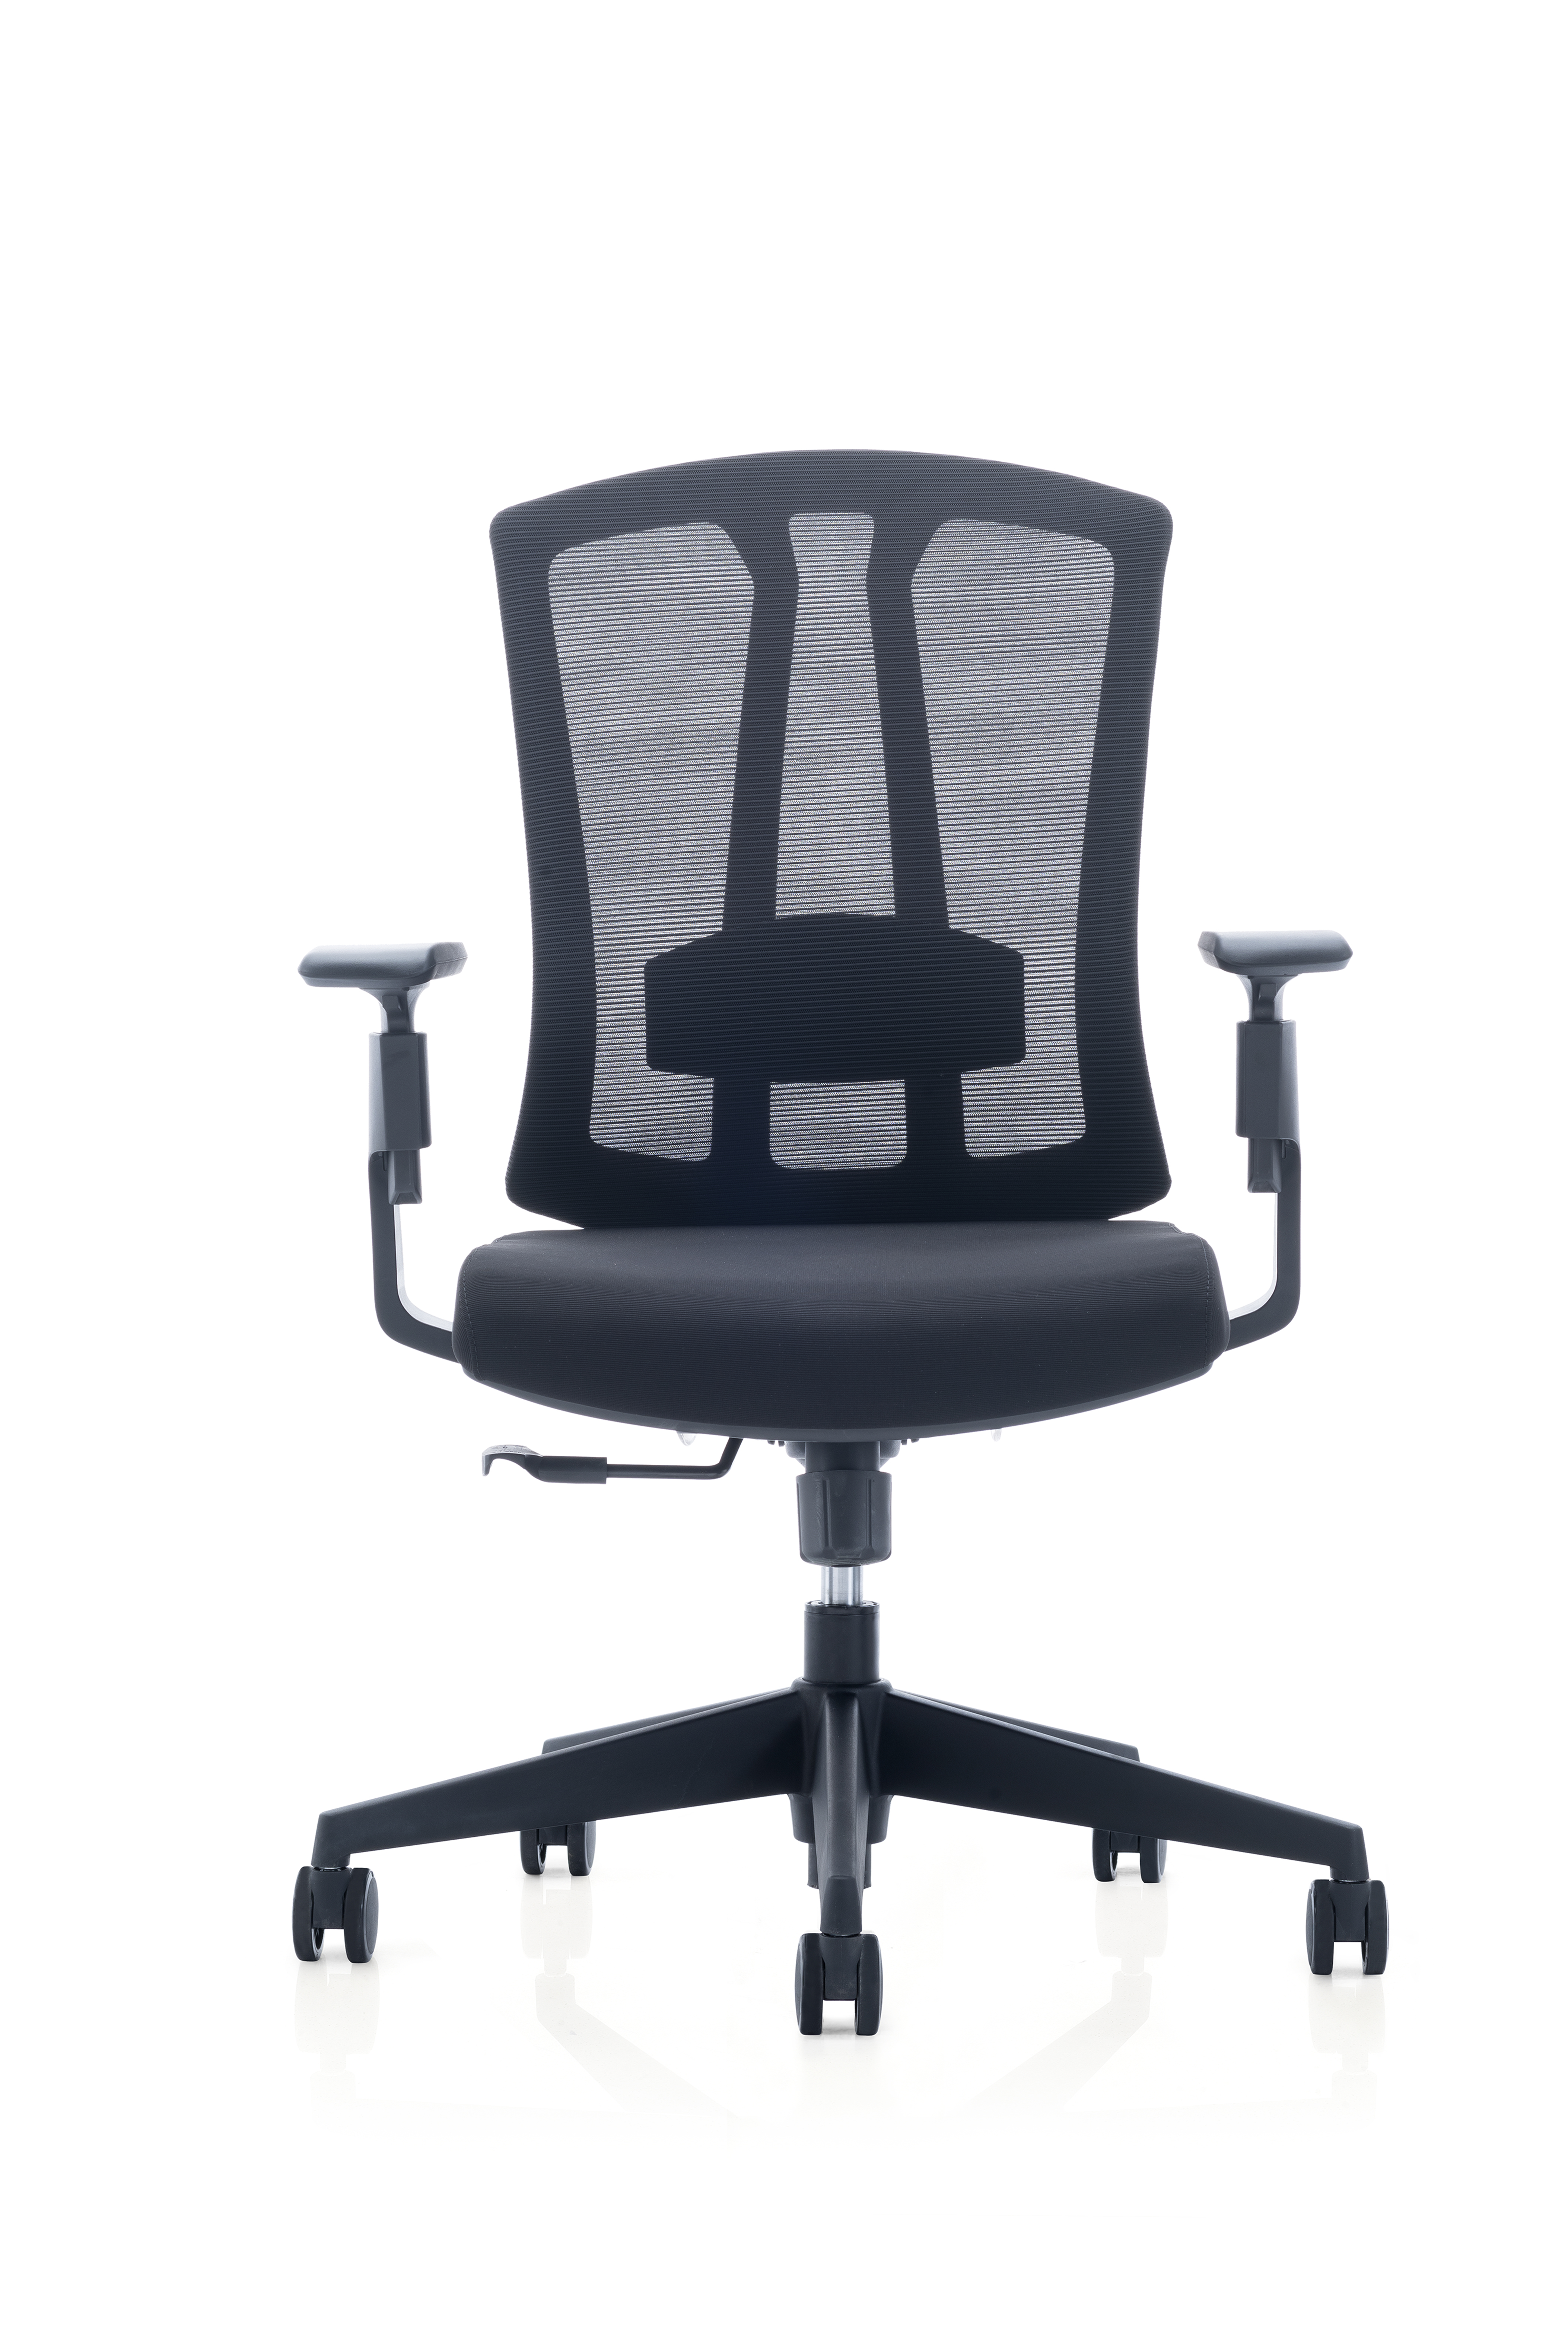 China Wholesale Office Furniture Center Manufacturers –  CH-267B – SitZone